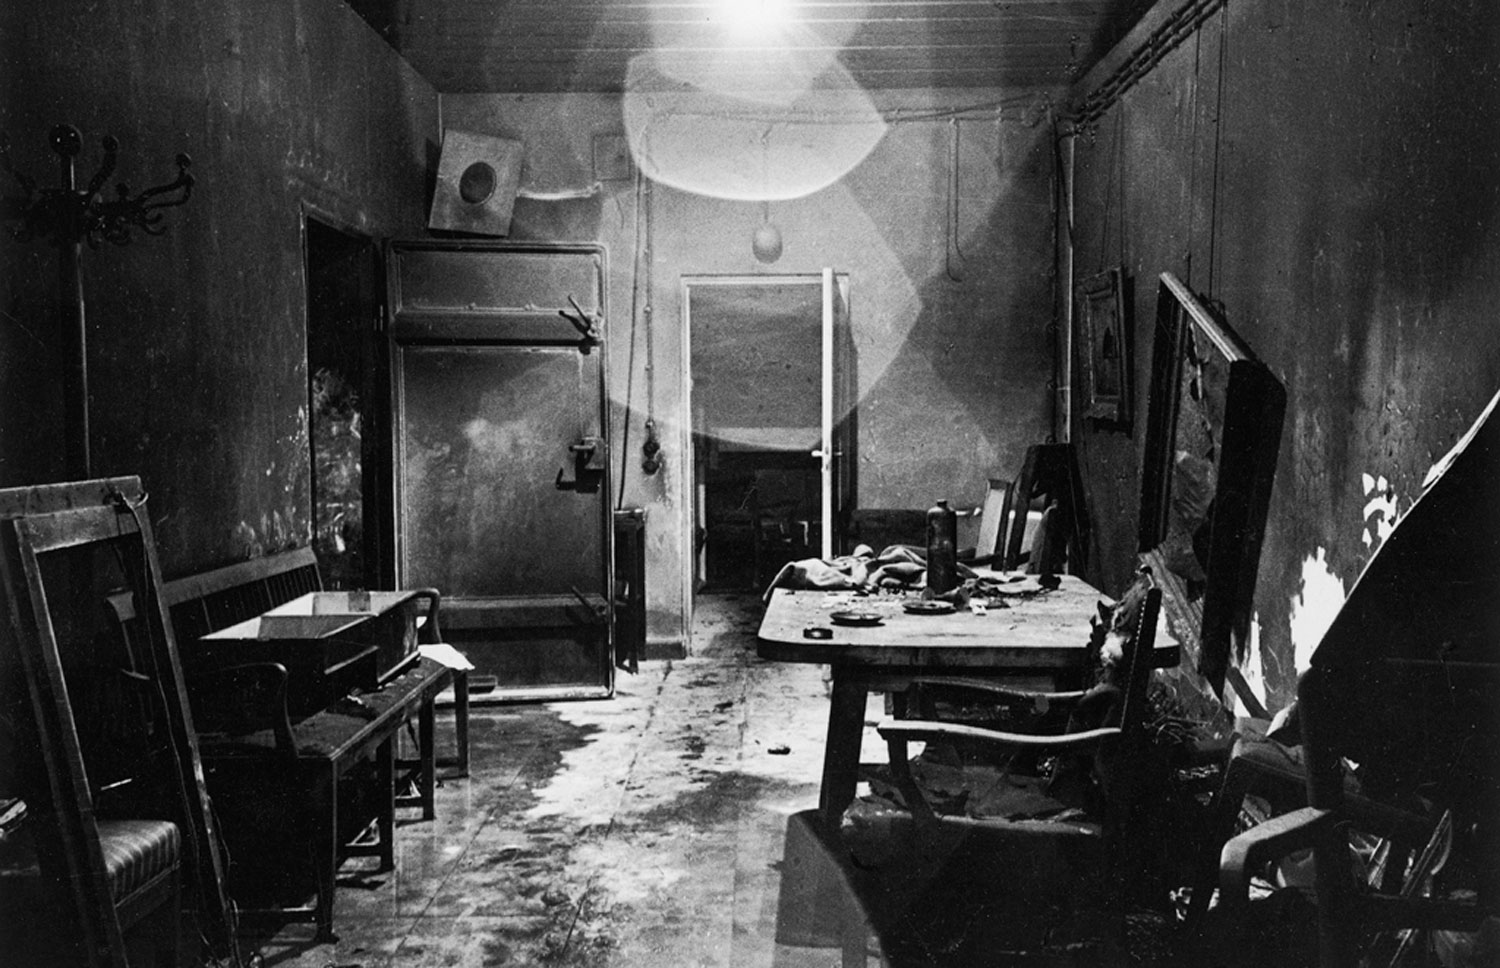 A new view of a photograph that appeared, heavily cropped, in LIFE, picturing Hitler's bunker, partially burned by retreating German troops and stripped of valuables by invading Russians.